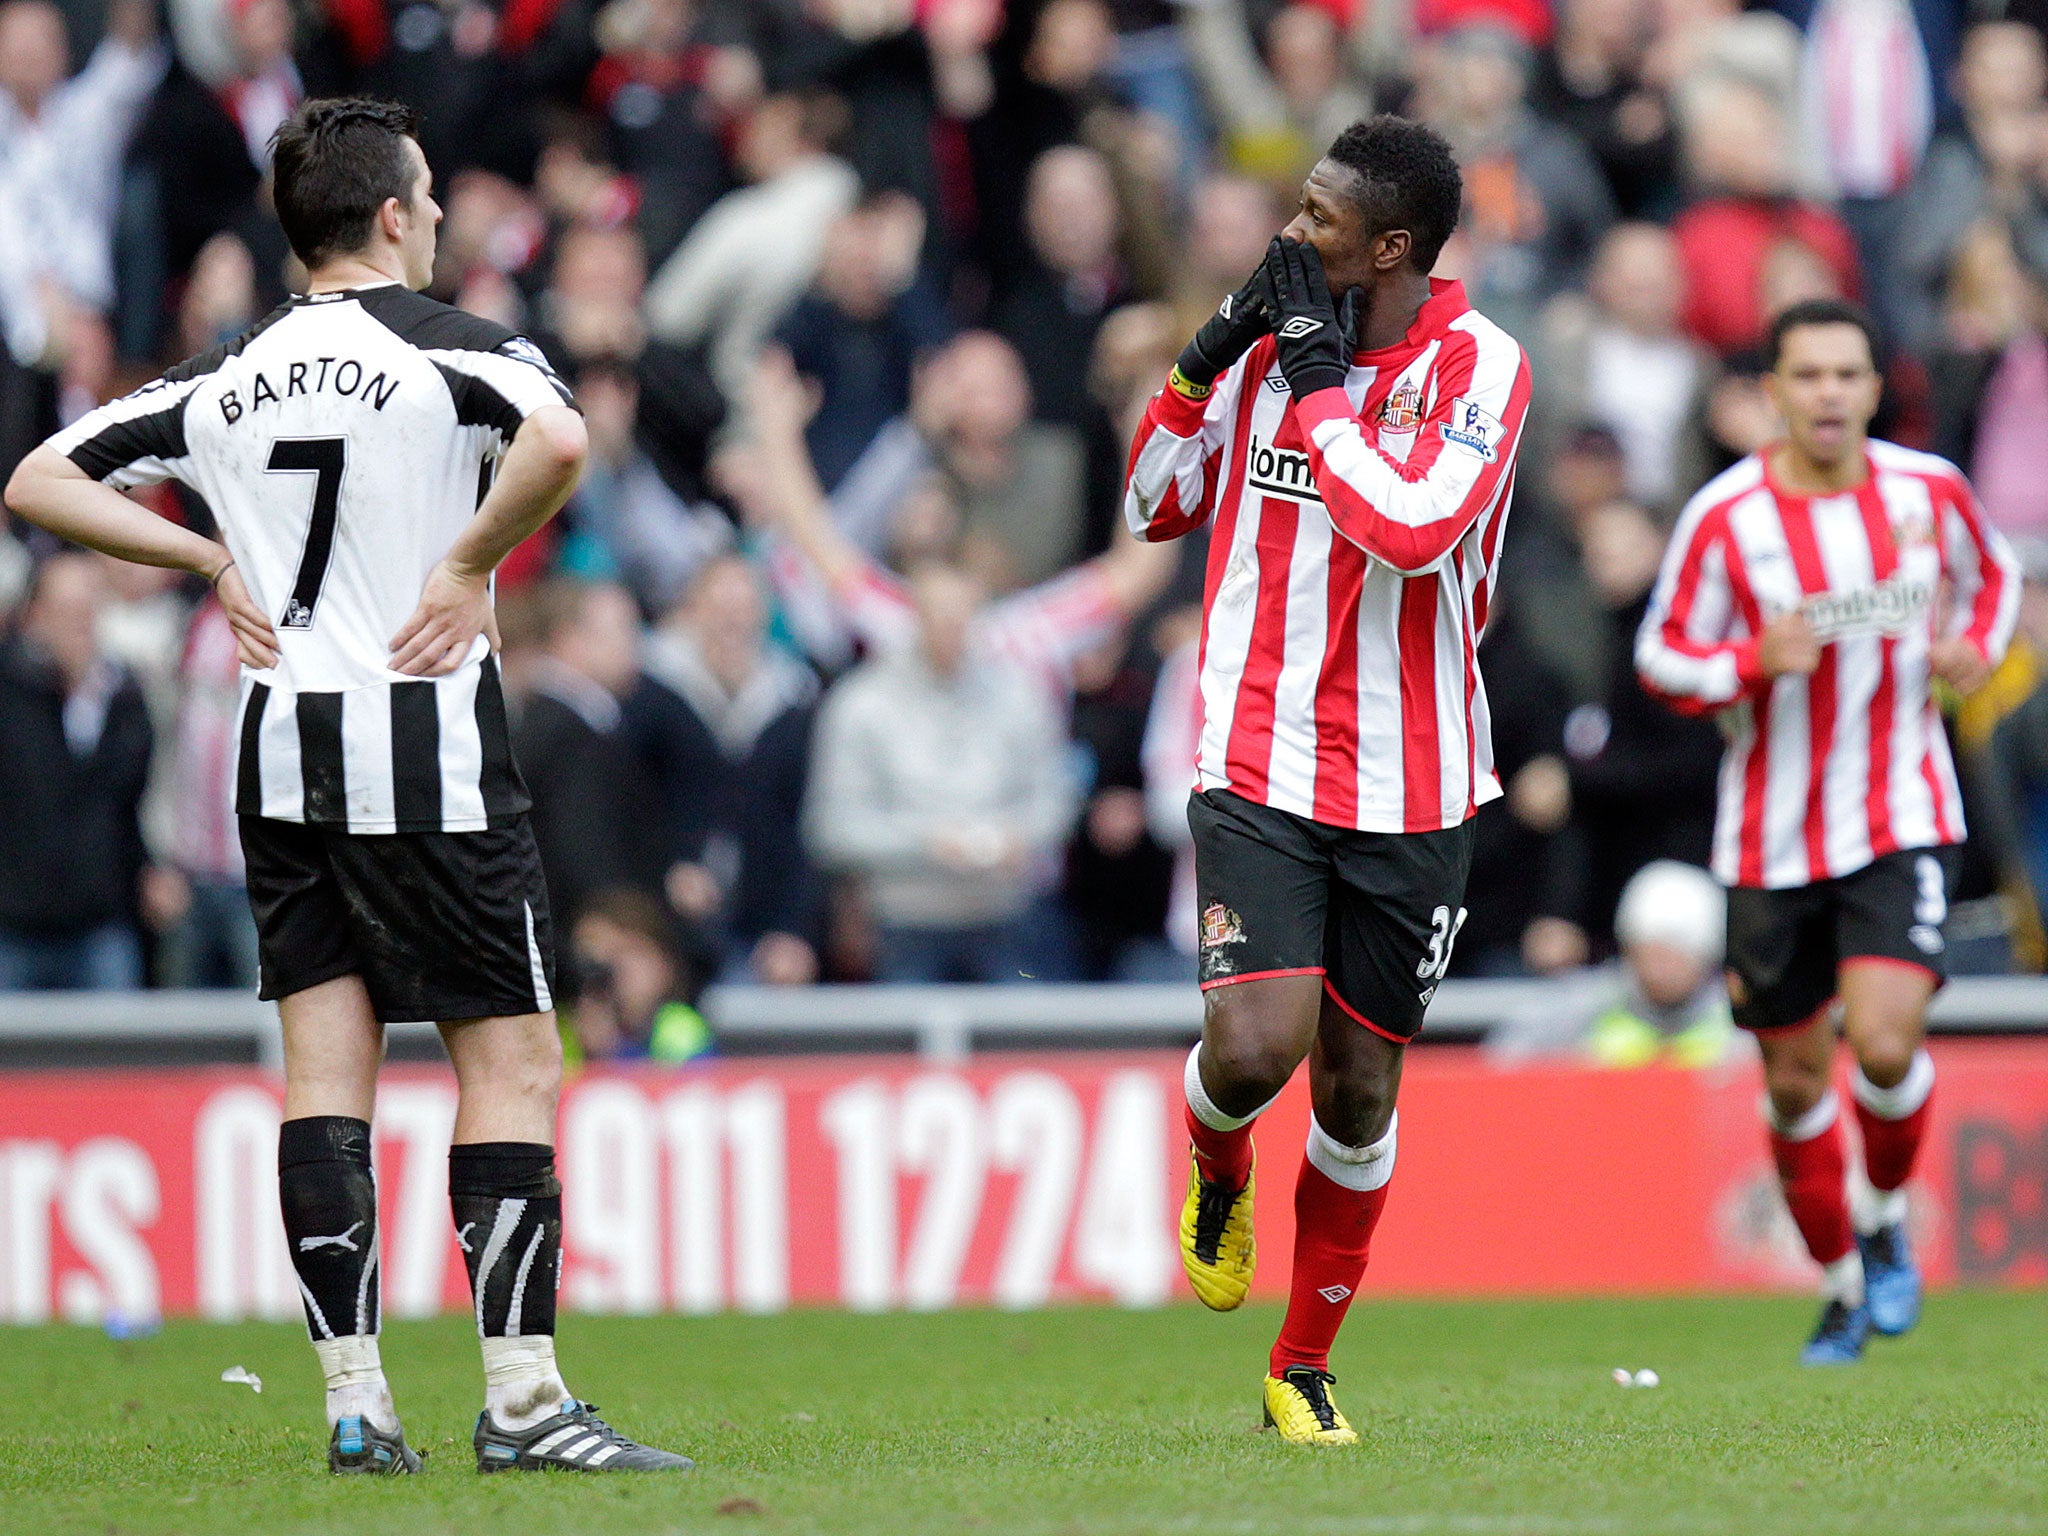 Gyan spent just over a season at the Stadium of Light, scoring 10 Premier League goals for the Black Cats